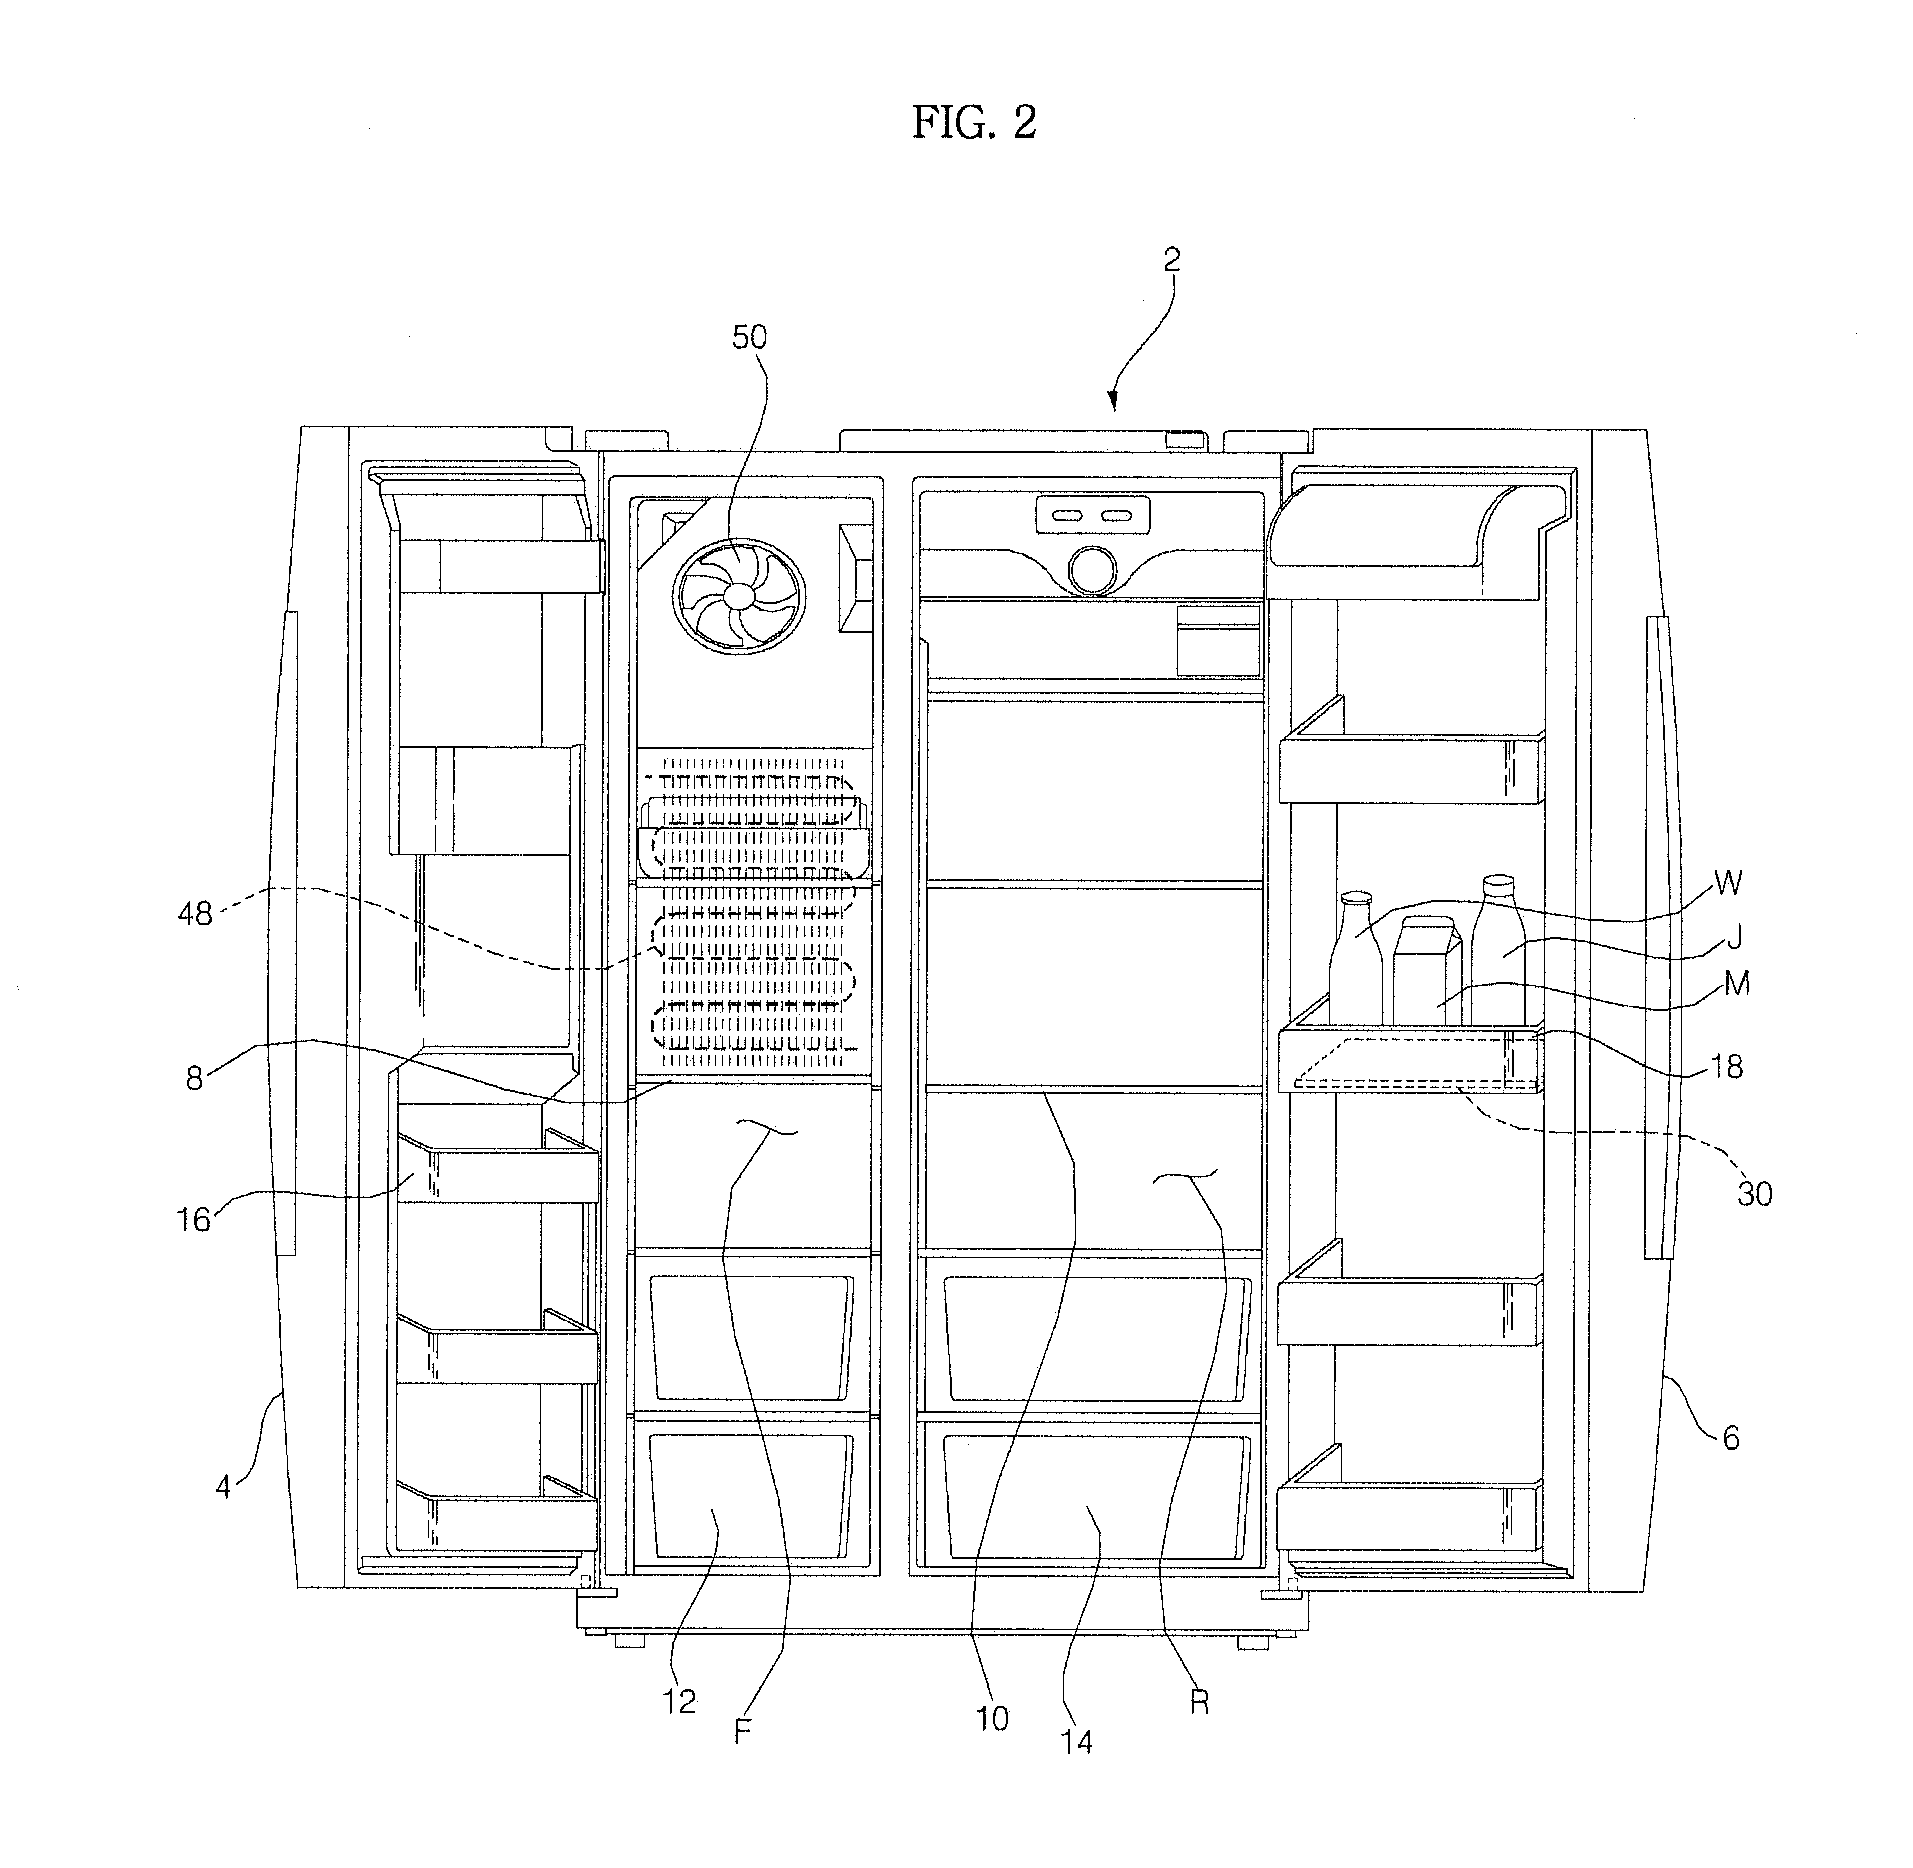 Refrigerator and method of operating the same